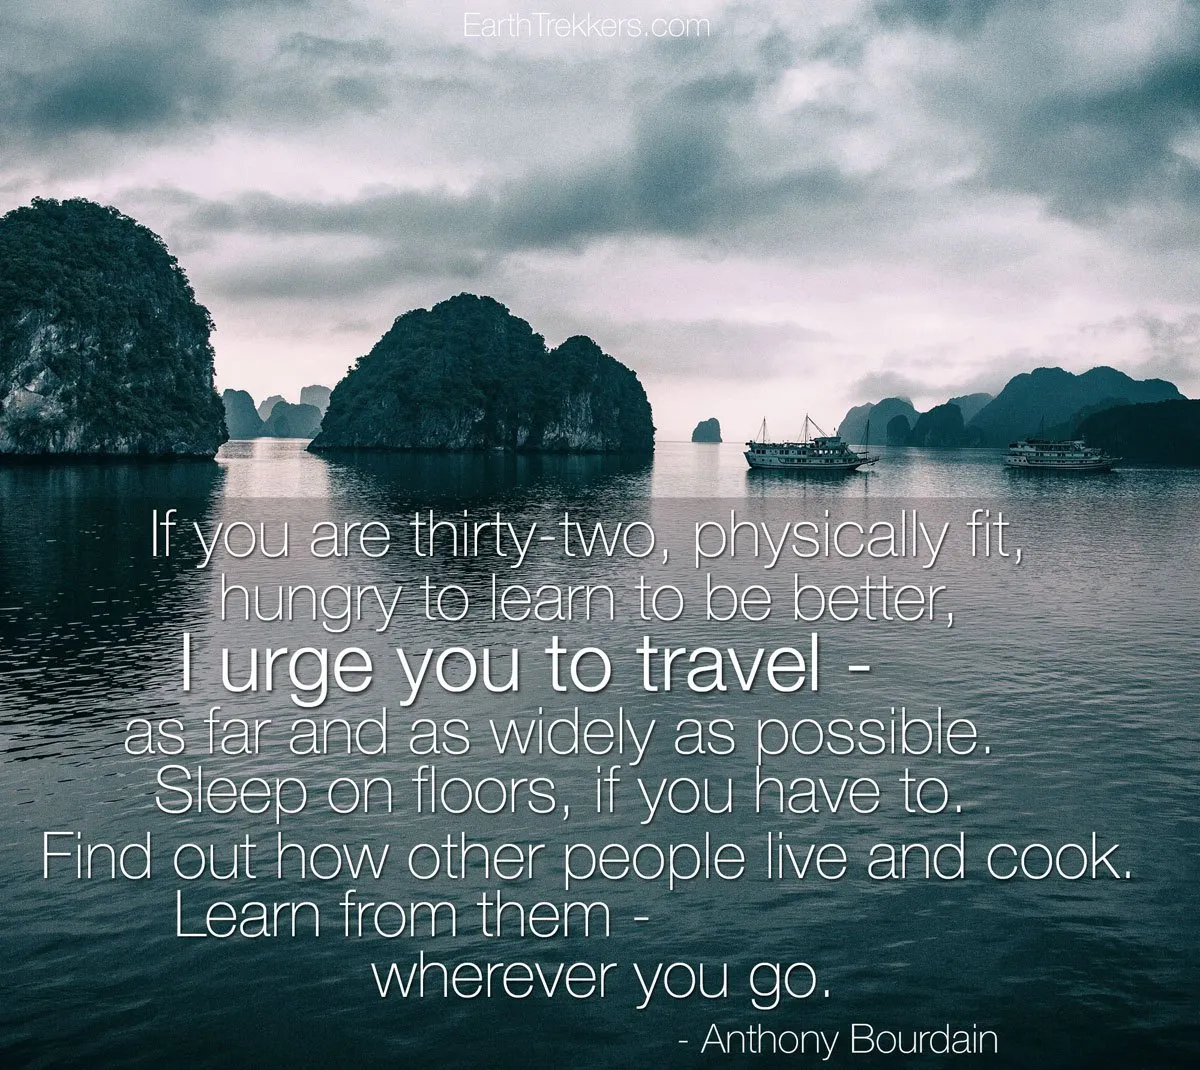 Anthony Bourdain Travel Widely Quote